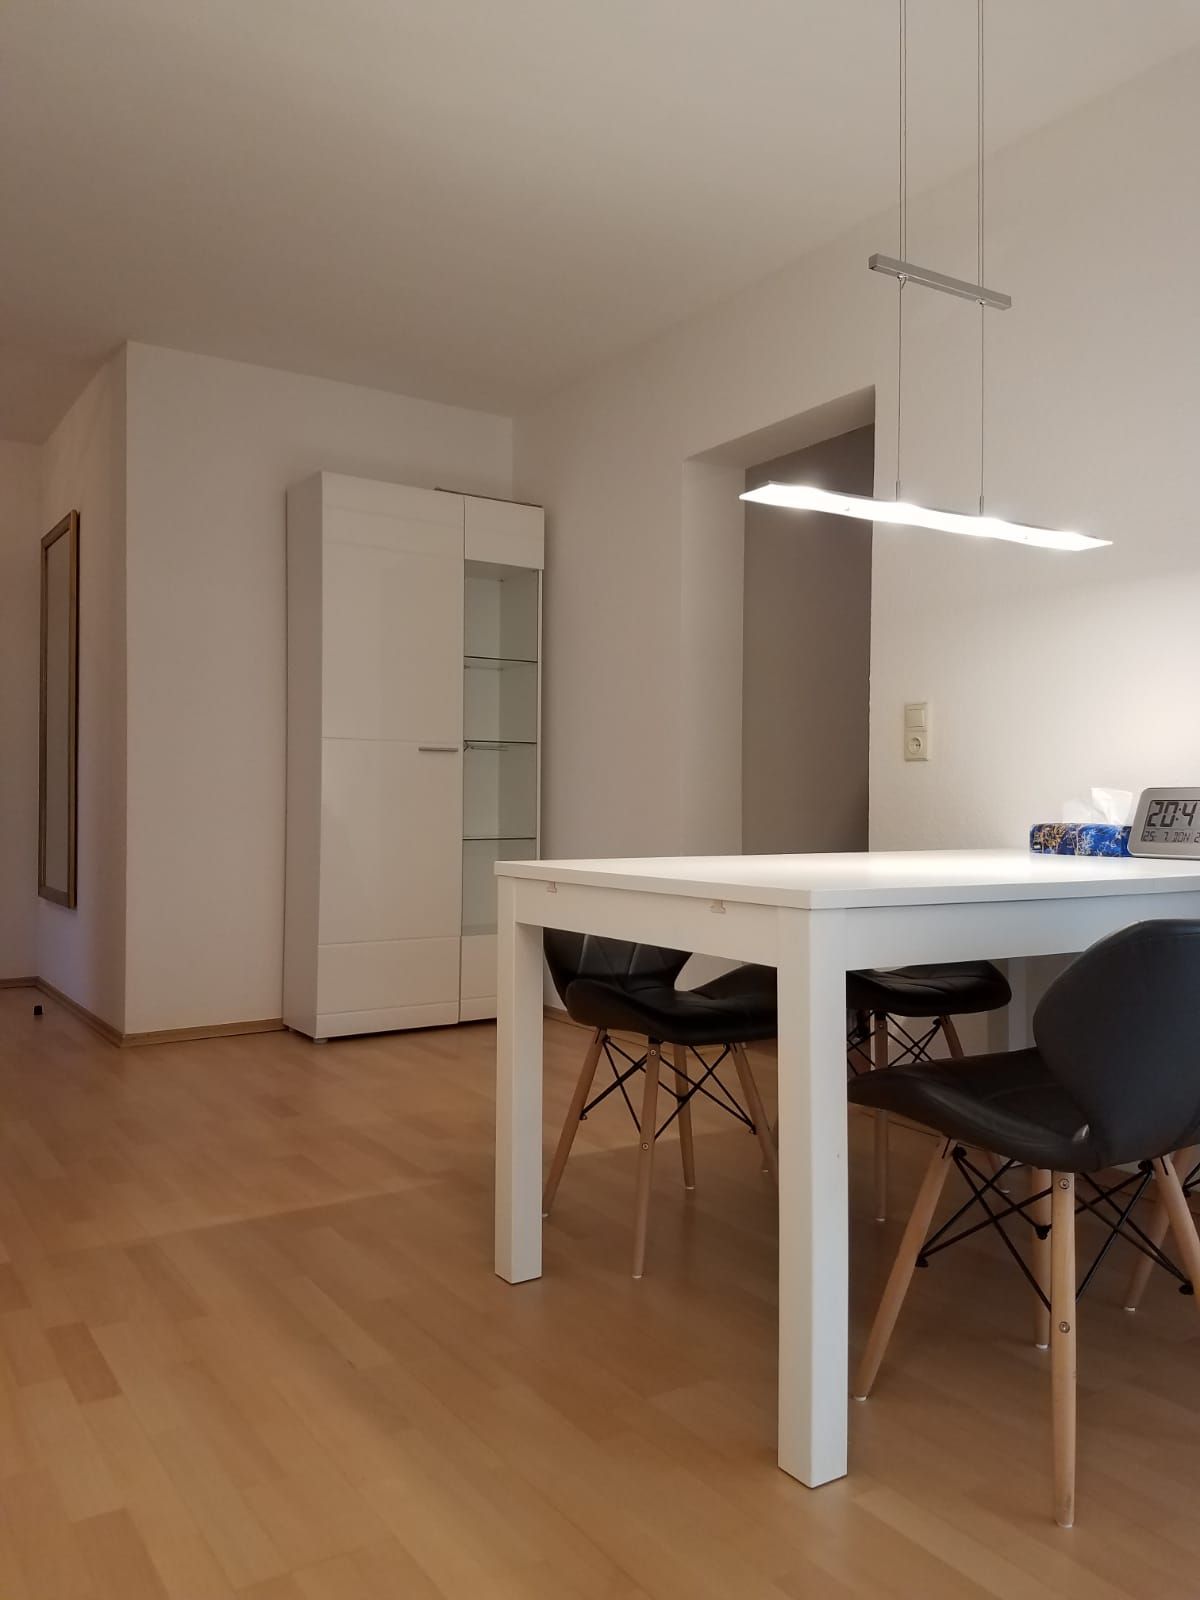 Fantastic maisonette apartment in a central location close to the Rhine